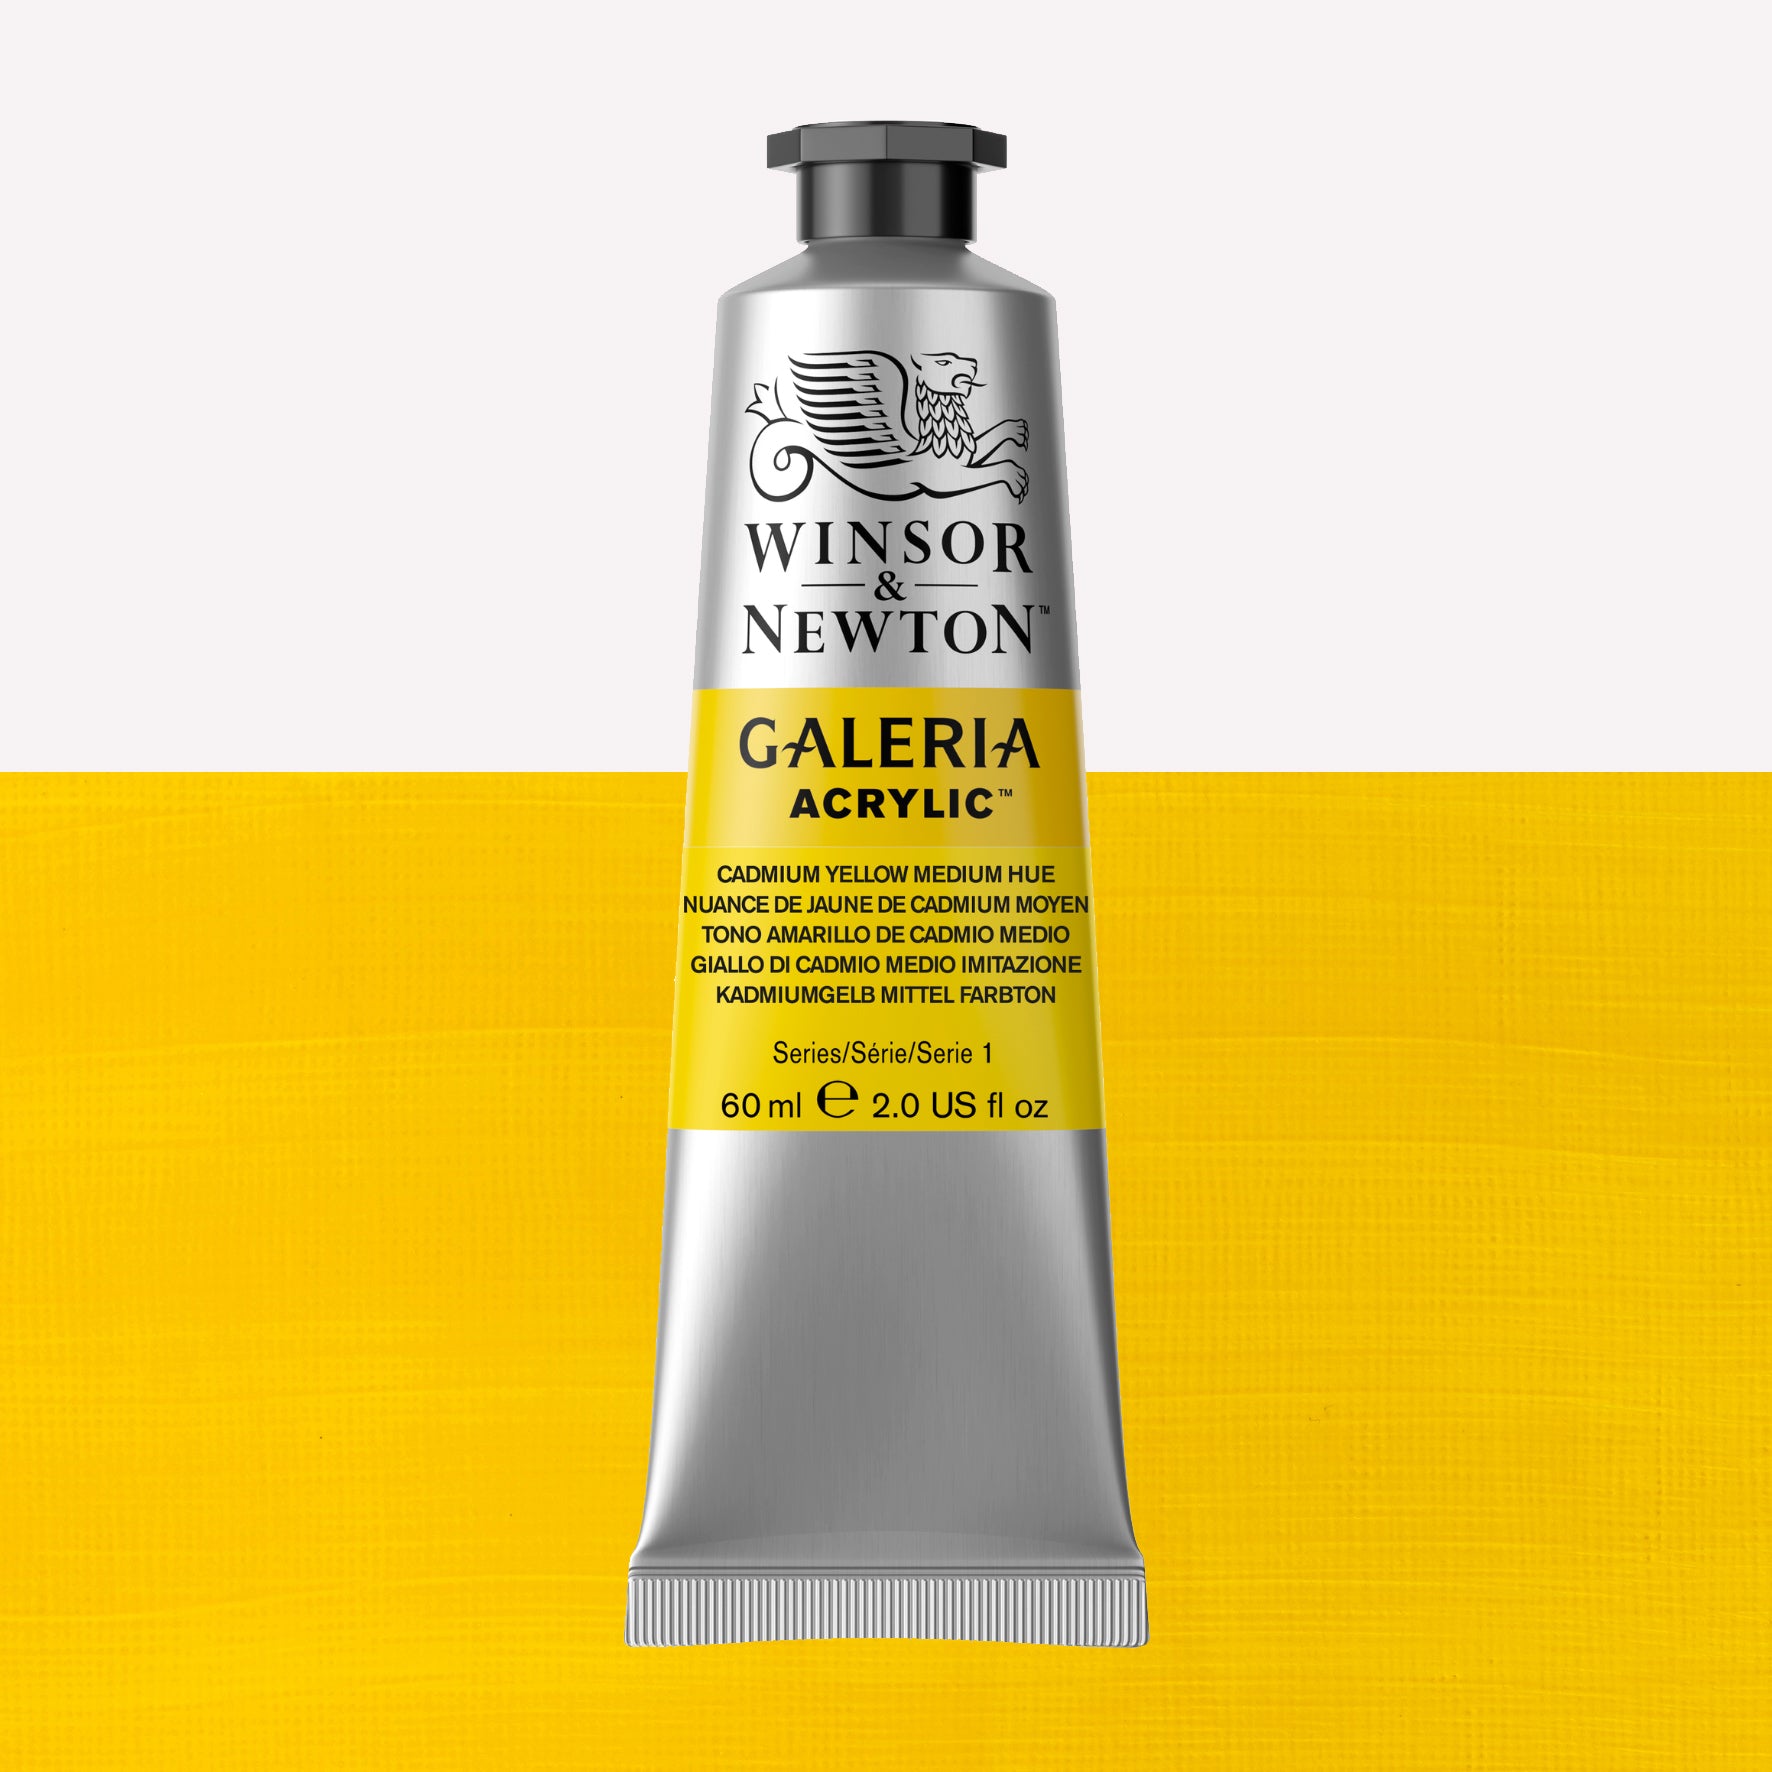 A 60ml tube of vibrant Galeria Acrylic paint in the shade Cadmium Yellow Medium Hue. This paint, made by Winsor and Newton, is packaged in a silver tube with a black lid. 